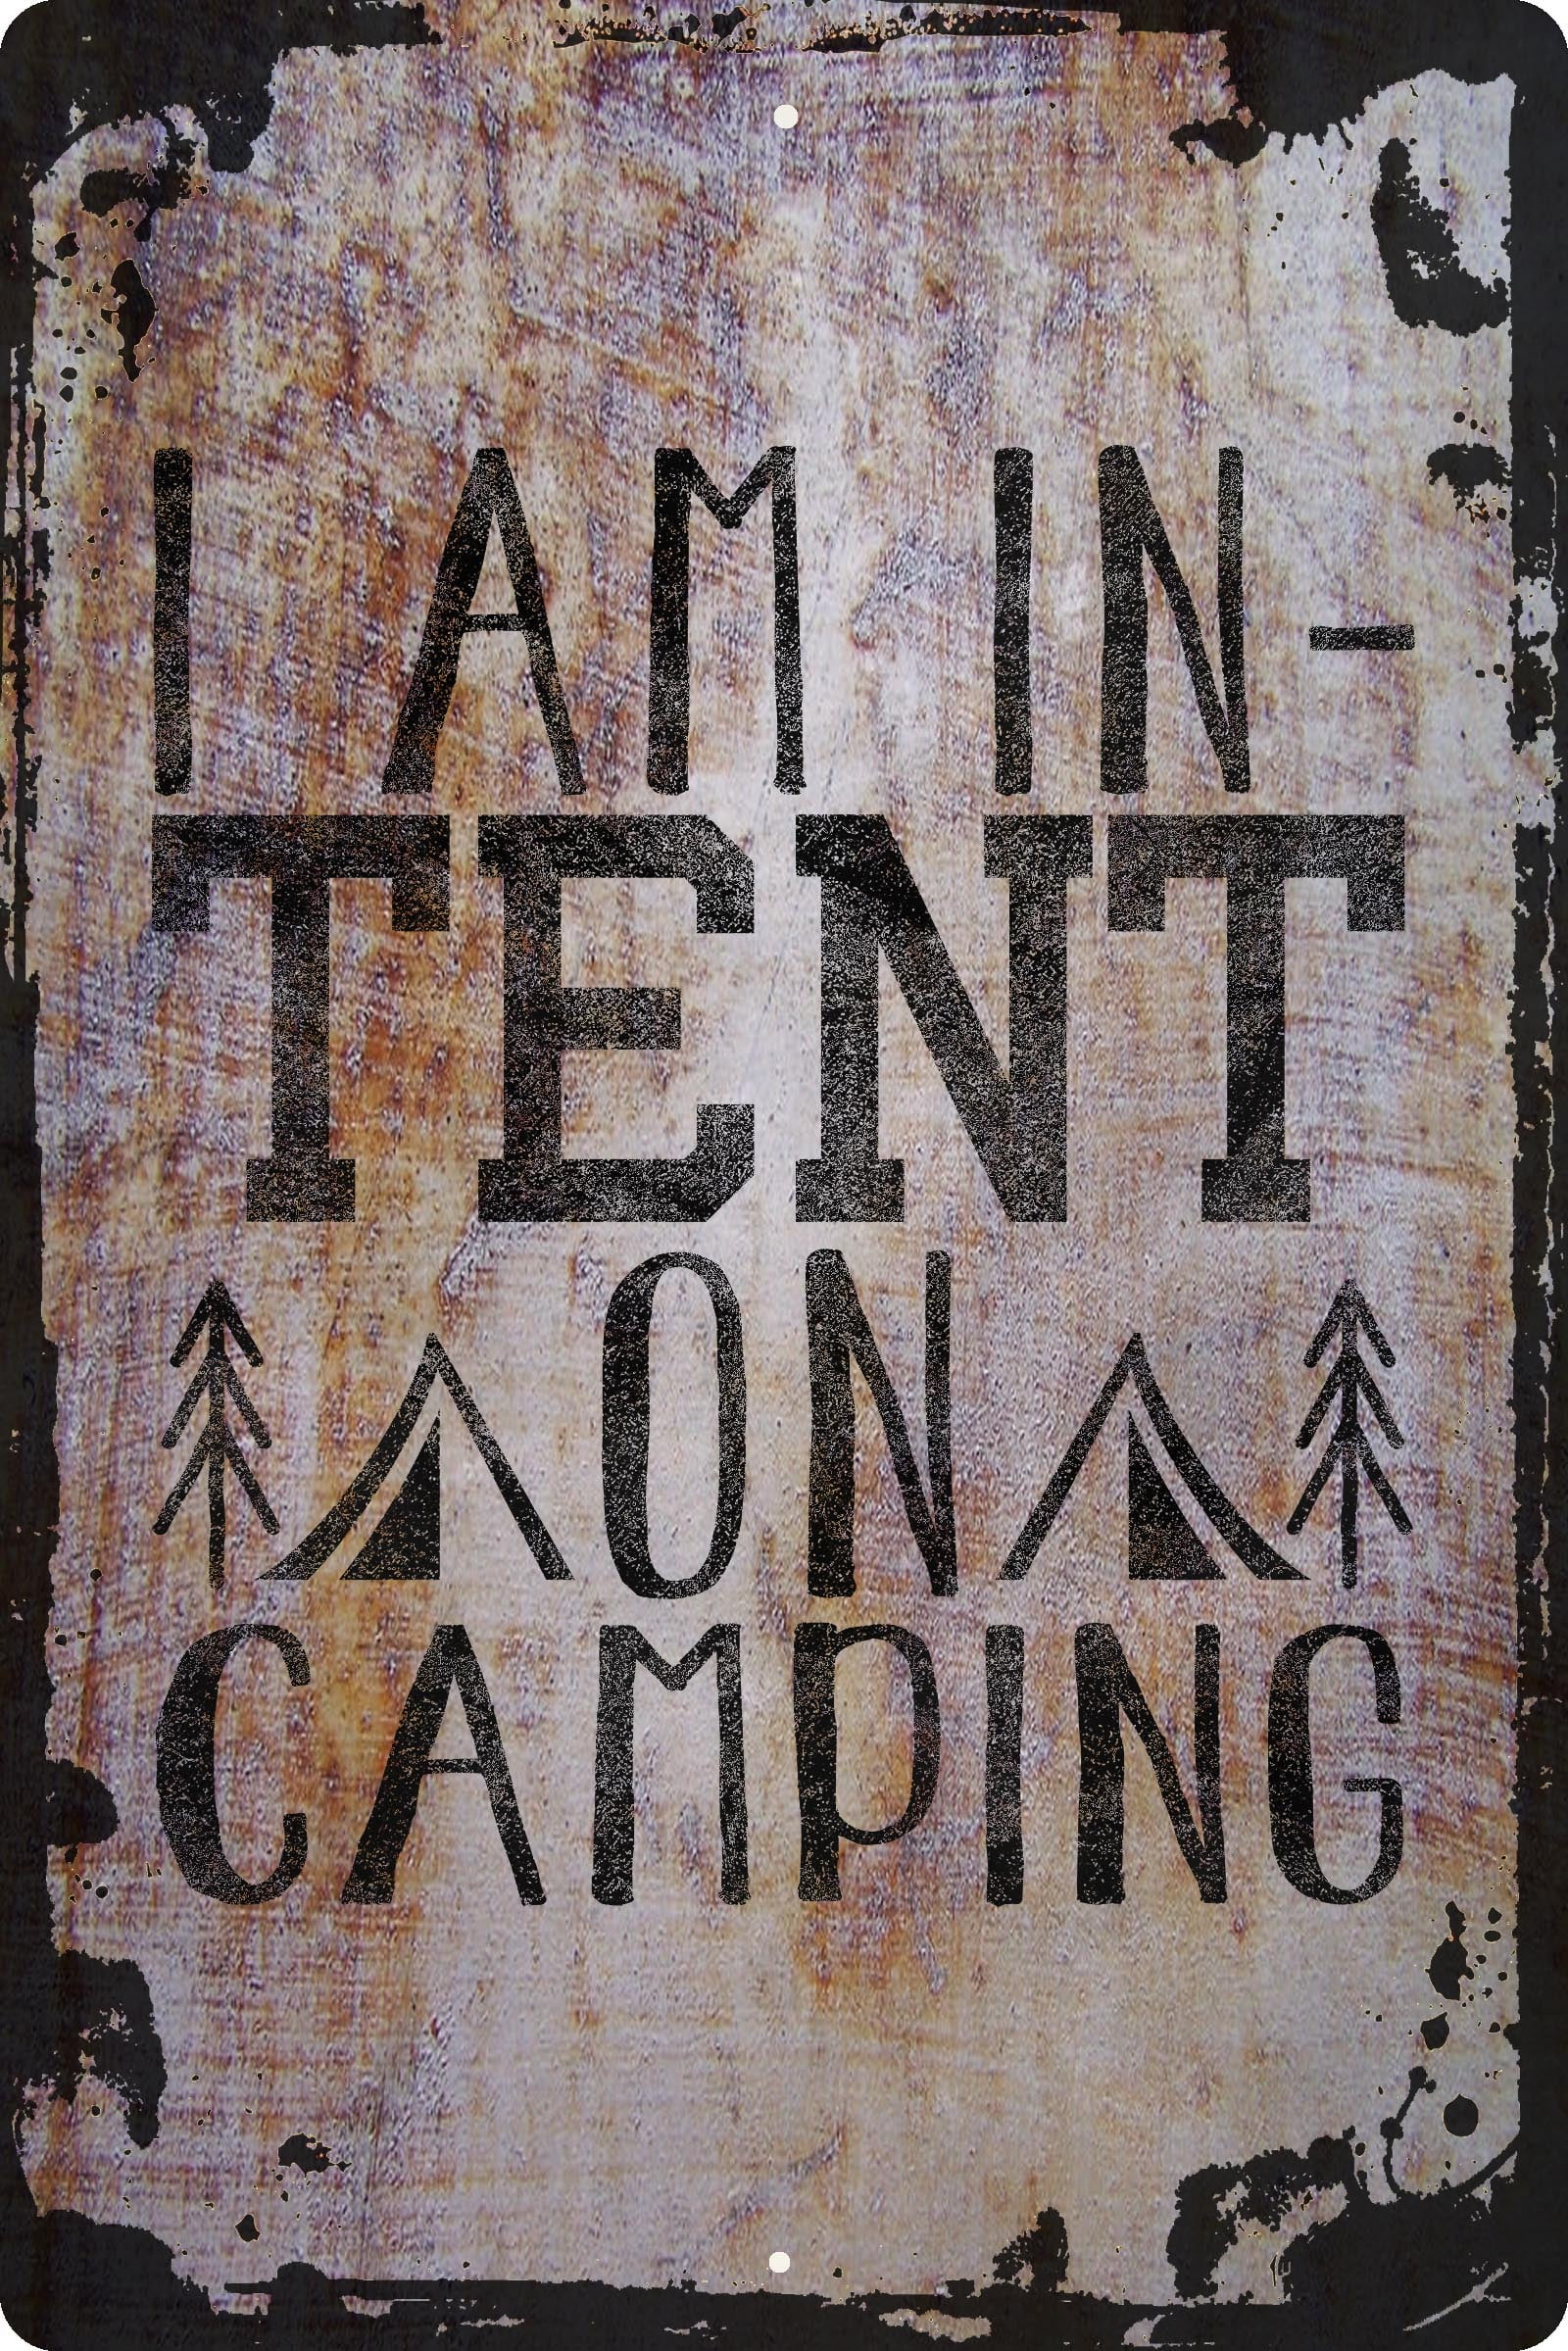 Sign I In On Camping Funny Outdoor Puns for Nature Lovers Decorative Art Wall Decor Gift - Walmart.com